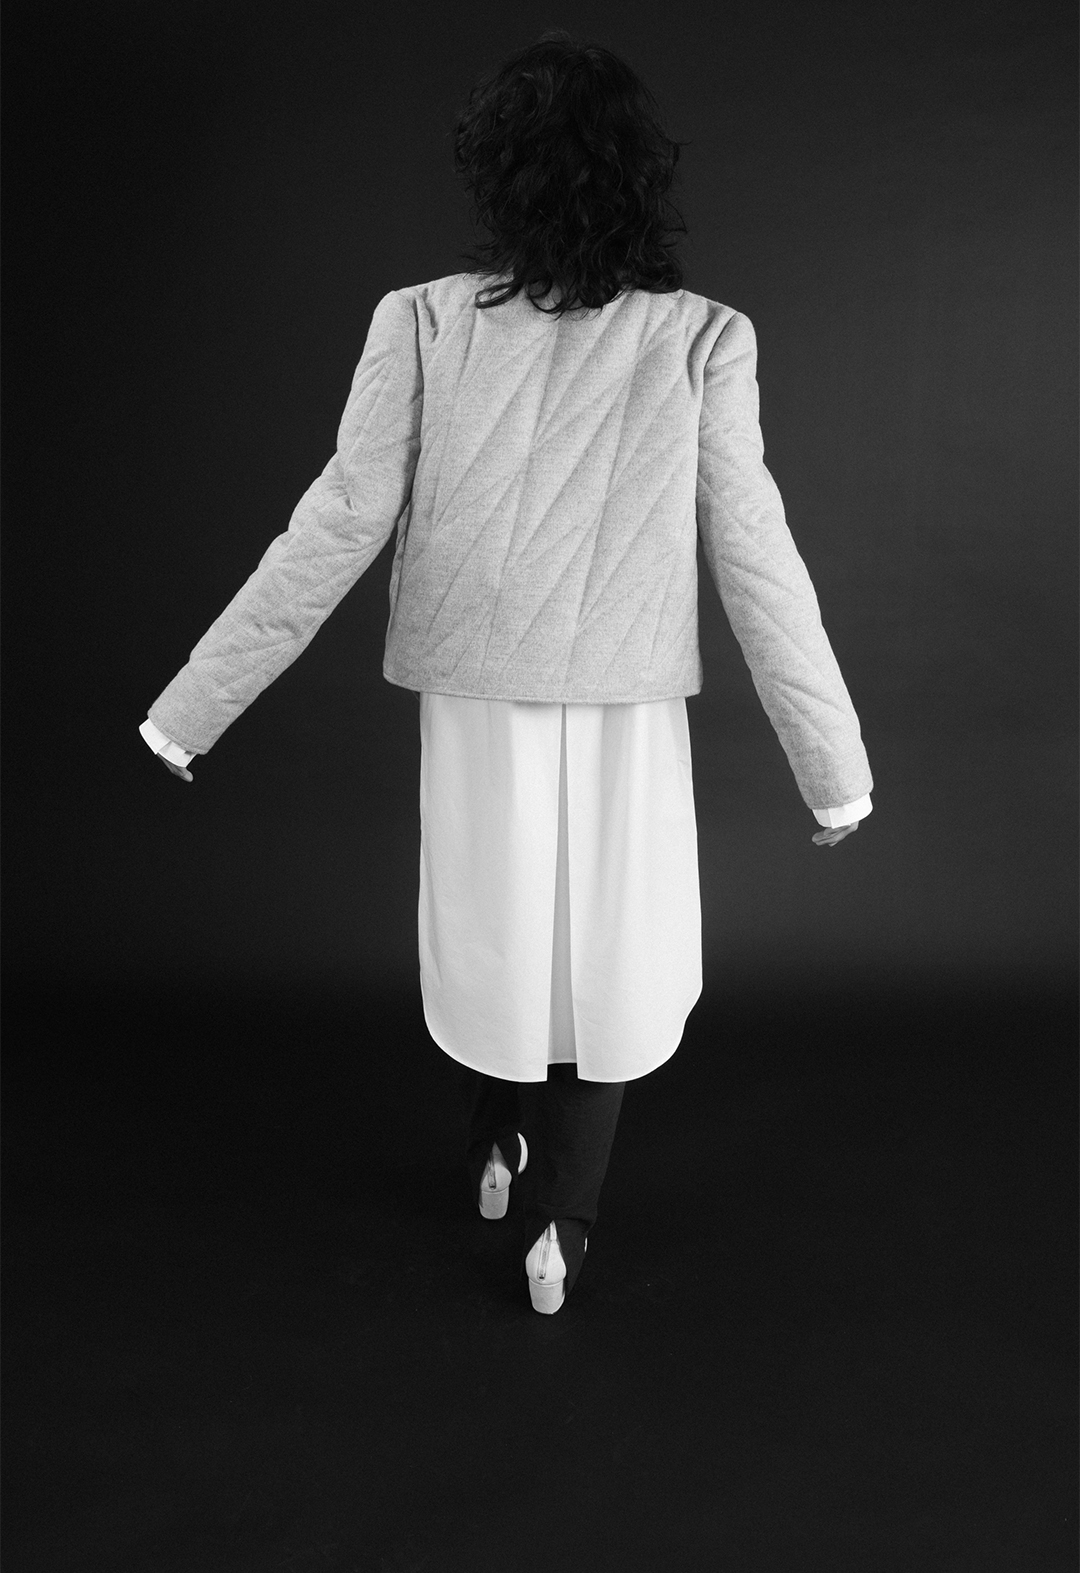 Photo of the model, Aria Puga, wearing a grey wool quilted jacket, a white cotton tunic shirt, and teal linen trousers. The jacket has geometric quilting. The back of the tunic shirt has an inverted box pleat. The trousers have a back slit at the hem. The model is turned with their back to the camera. The background is black. The photo is monochrome.